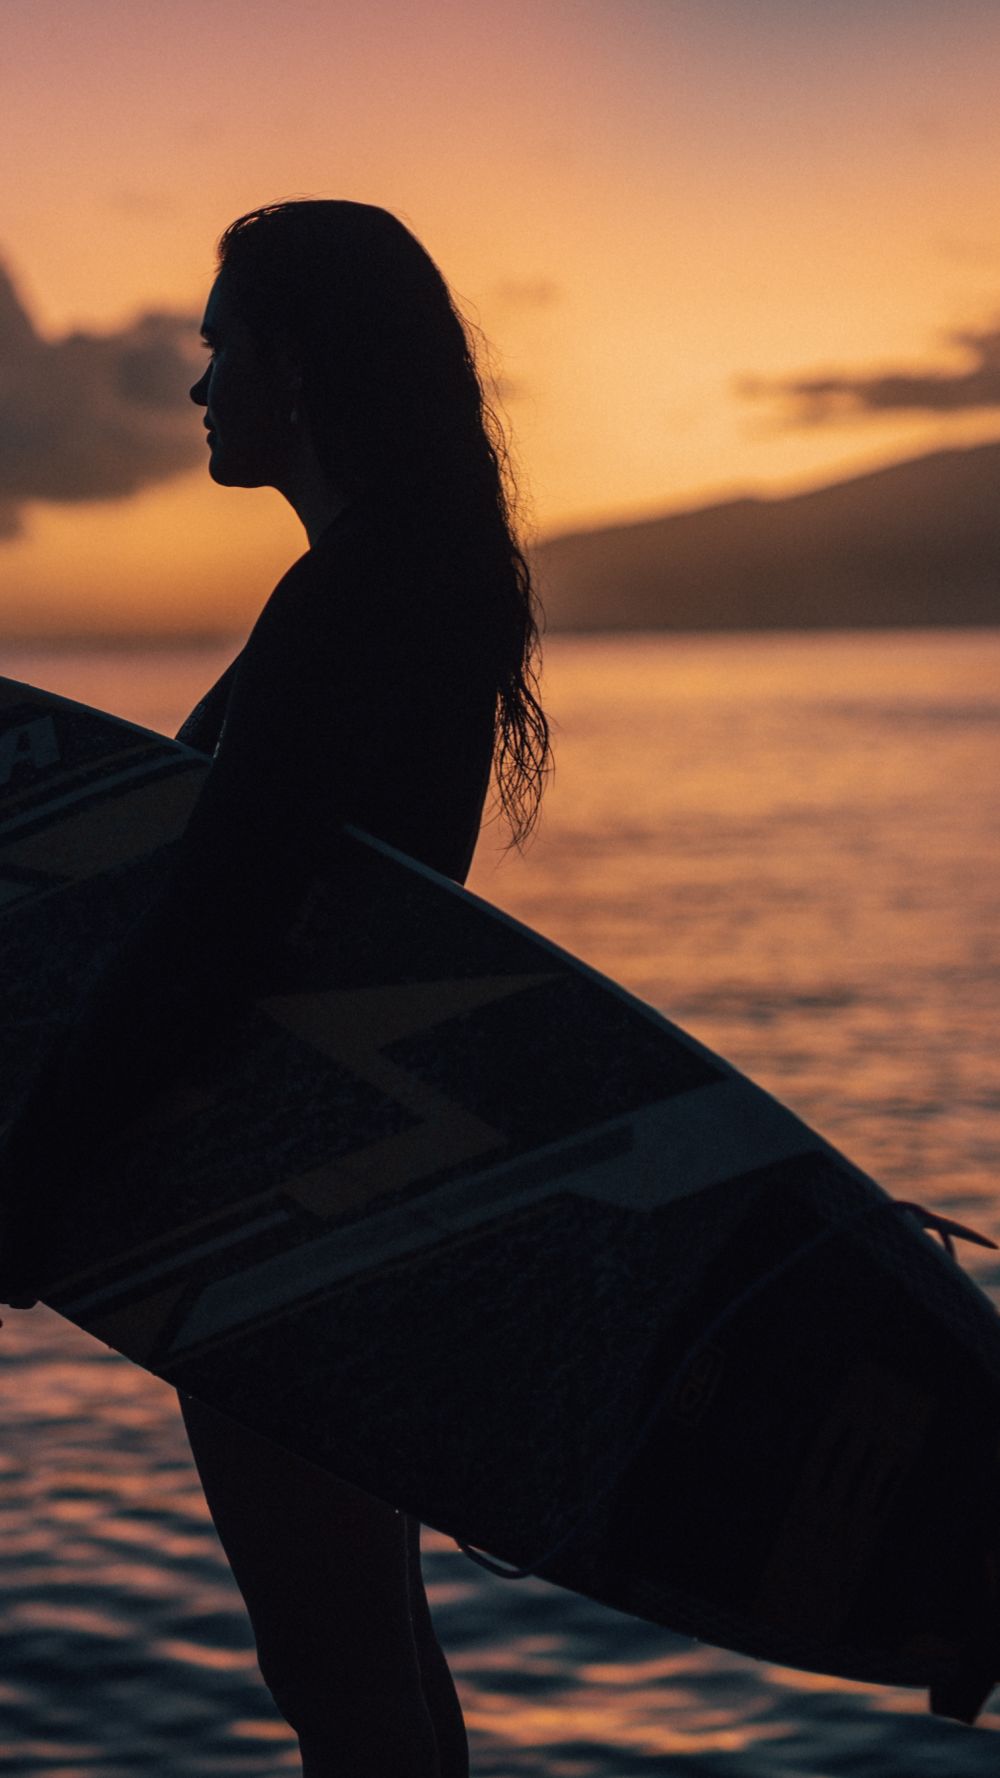 Zhana poses with her surfboard at sunset